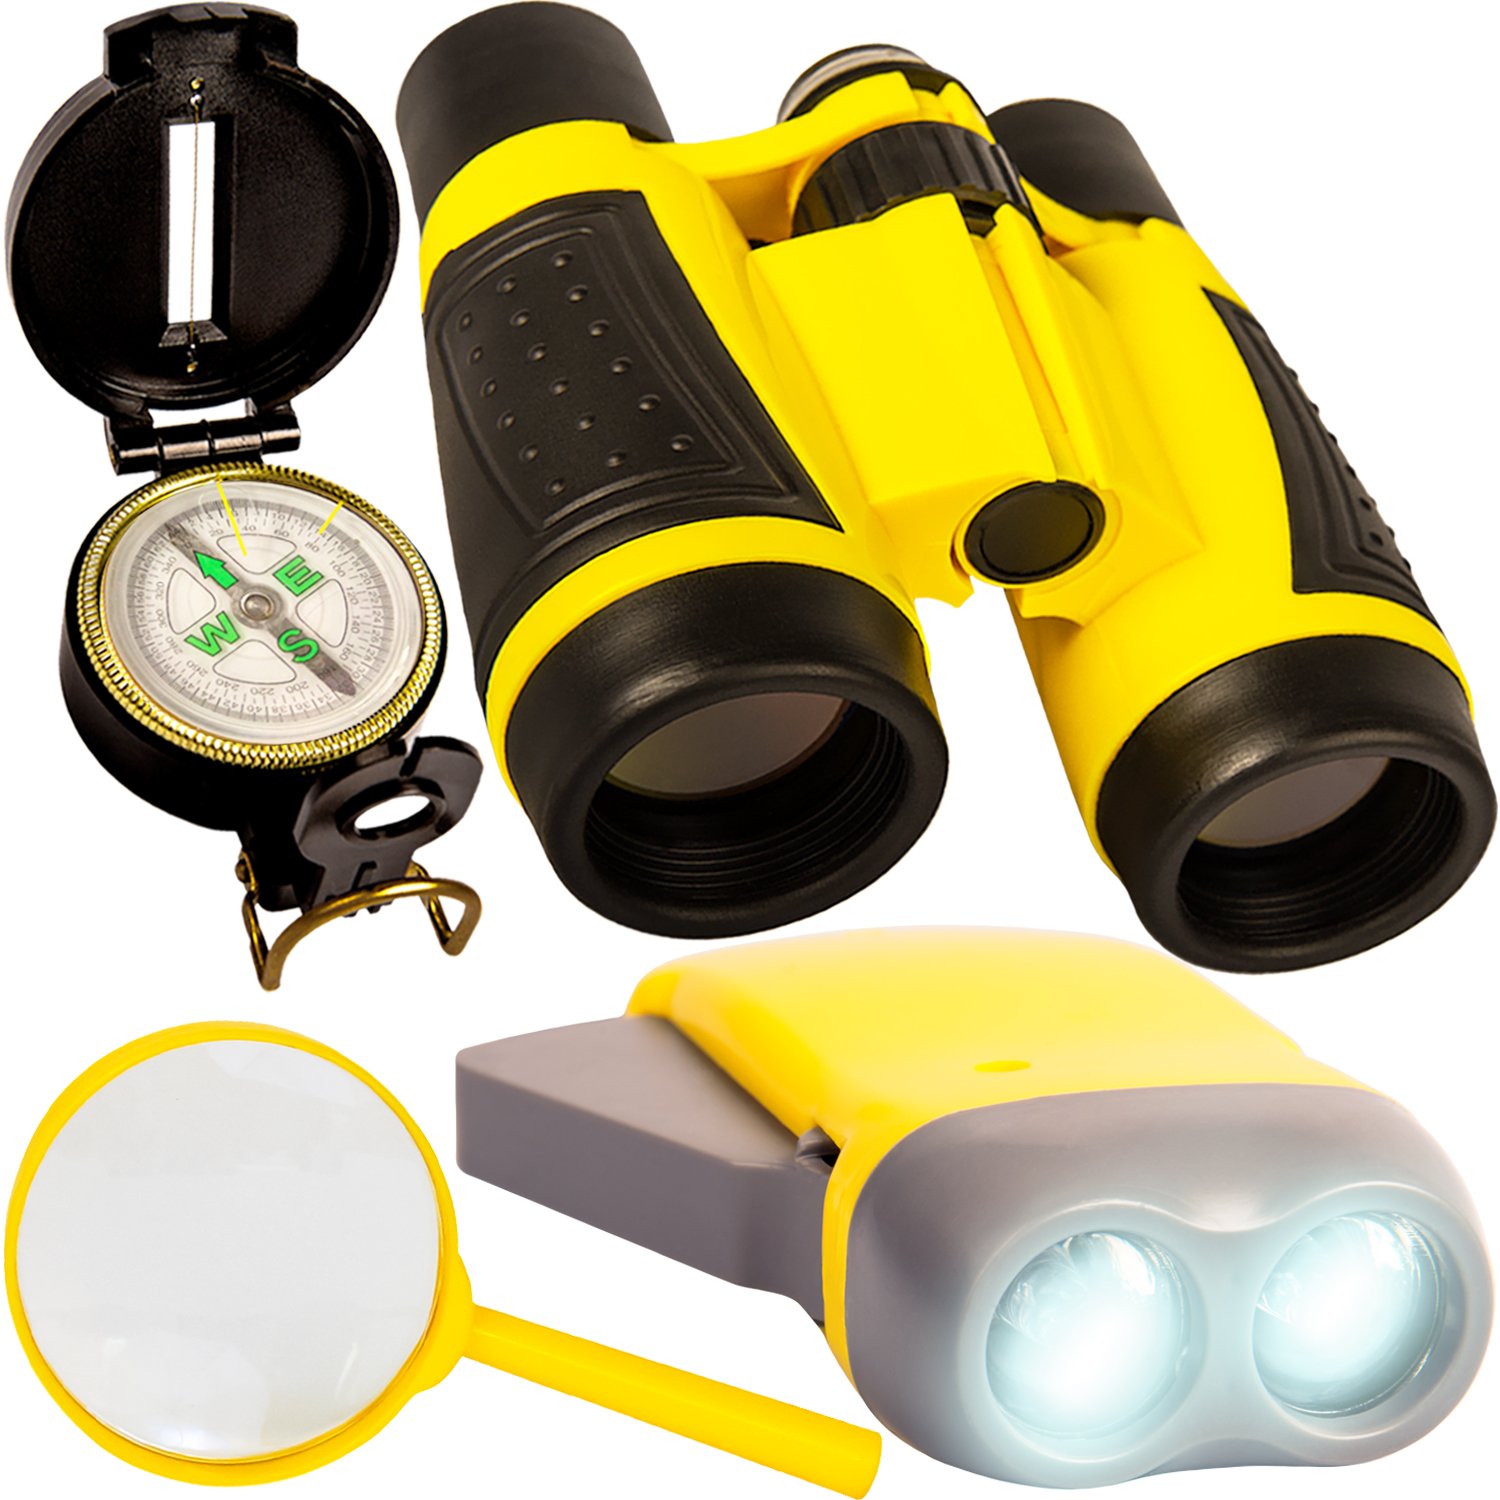 Outdoor Adventure Kit for Kids - Binoculars, Compass, Flashlight, Magnifying Glass. Young Children Explorer Camping Toy Set. Fun Backyard Nature Exploration Toys for Boys and Girls Ages 3 to 10